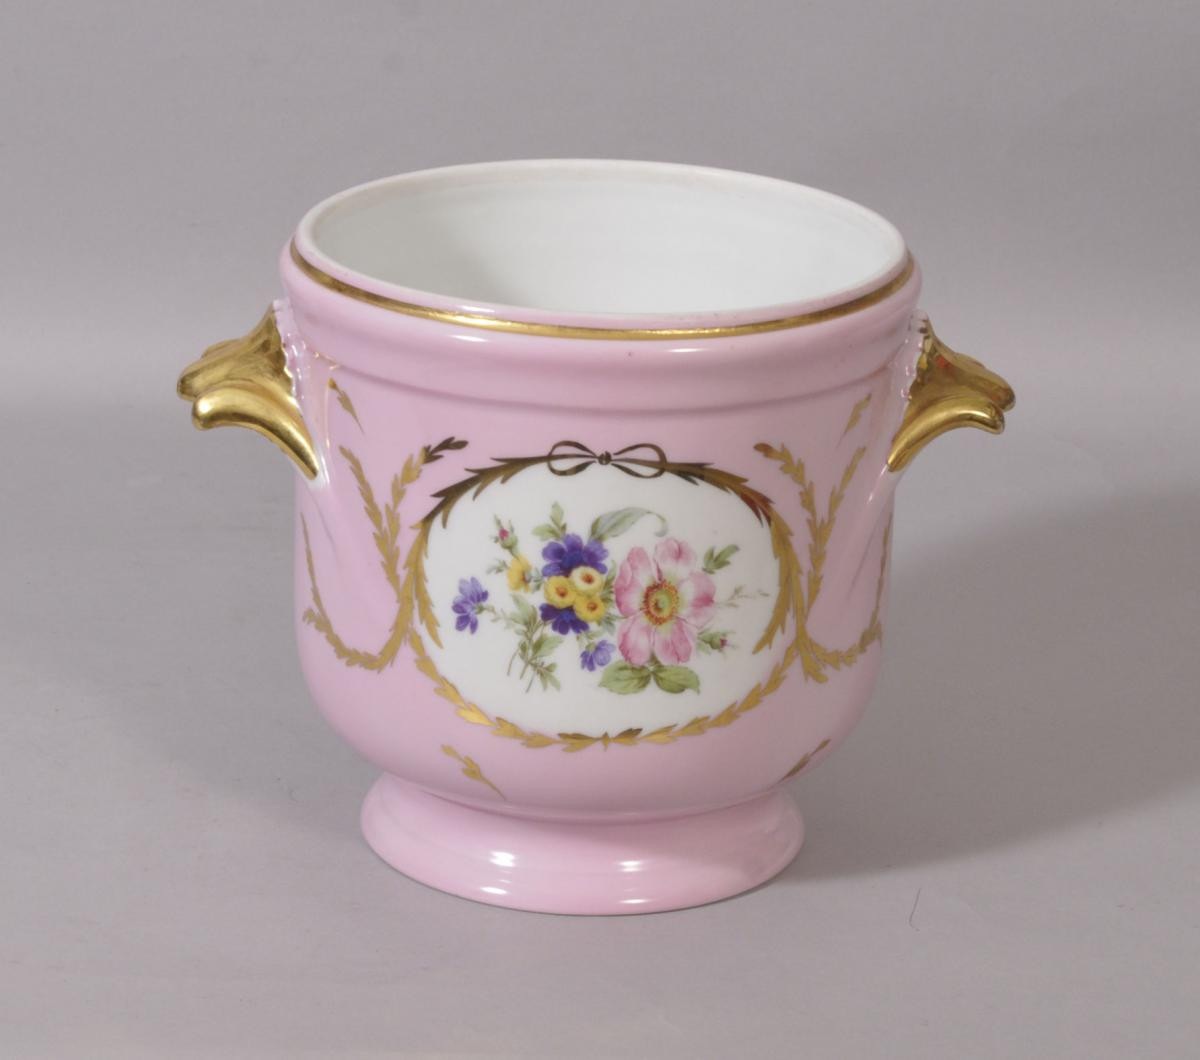 27 Awesome Limoges Vase Prices 2024 free download limoges vase prices of s 3116 antique early 20th century limoges porcelain jardiniere bada within s 3116 antique early 20th century limoges porcelain jardiniere